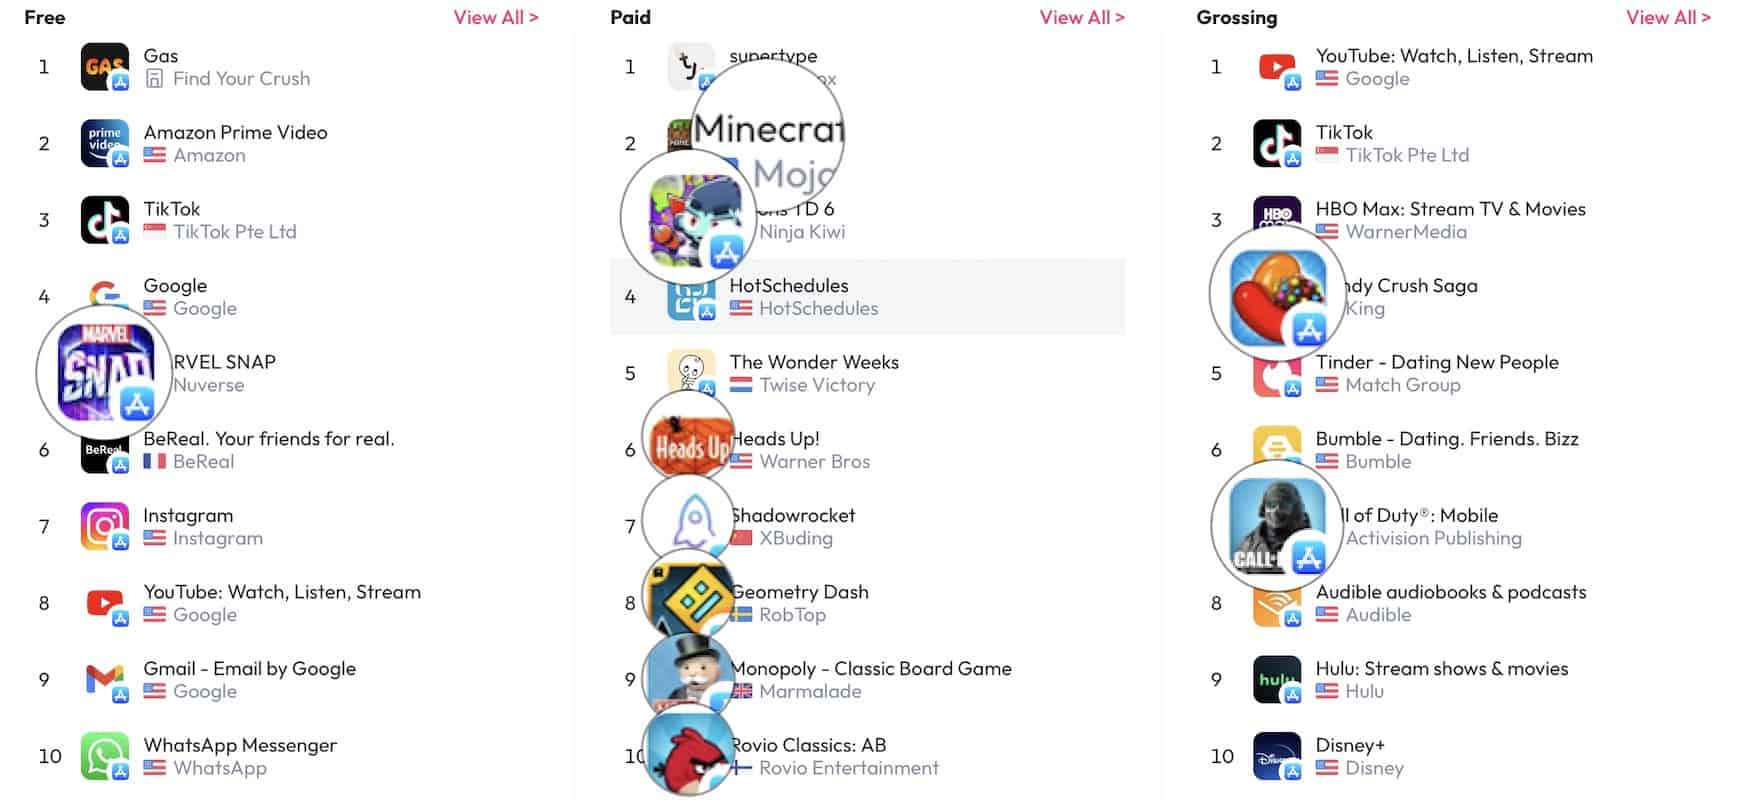 mobile game apps prominent in top charts